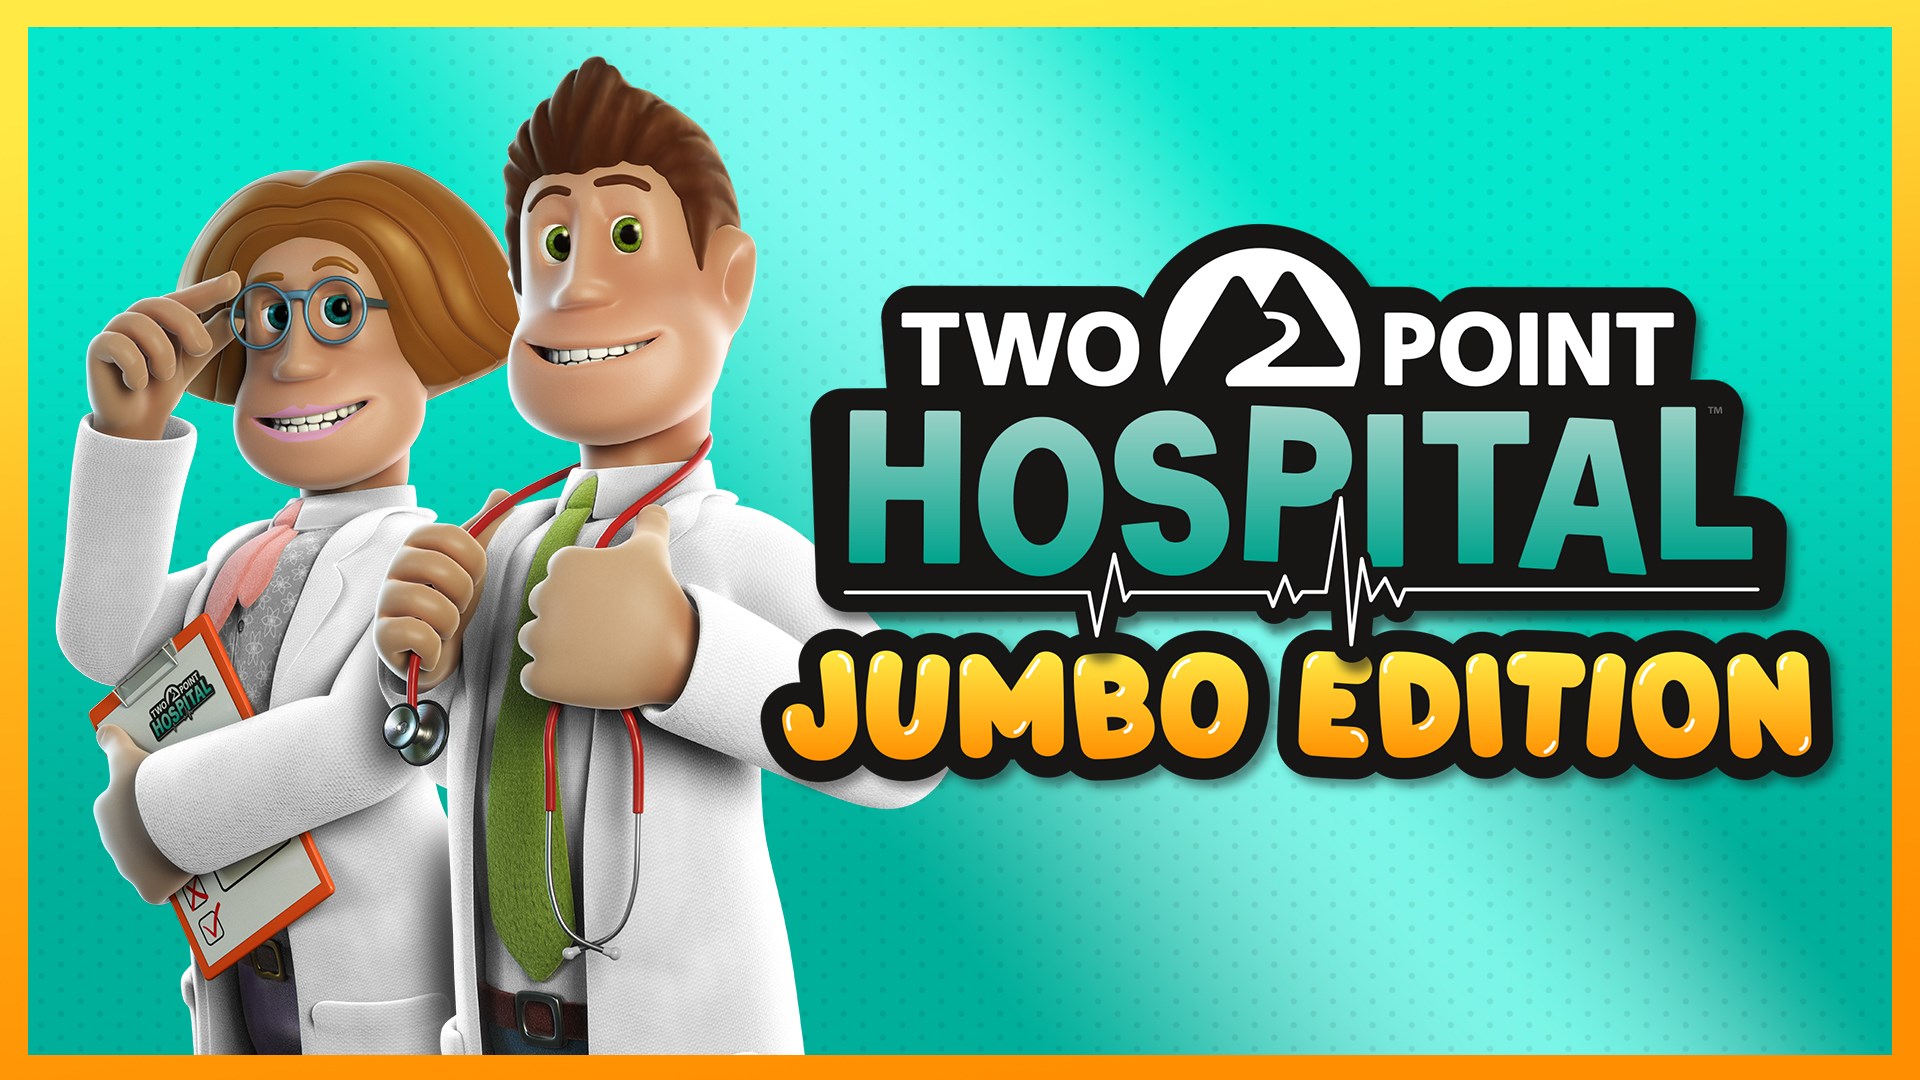 wing Billy goat lifetime Buy Two Point Hospital: JUMBO Edition | Xbox